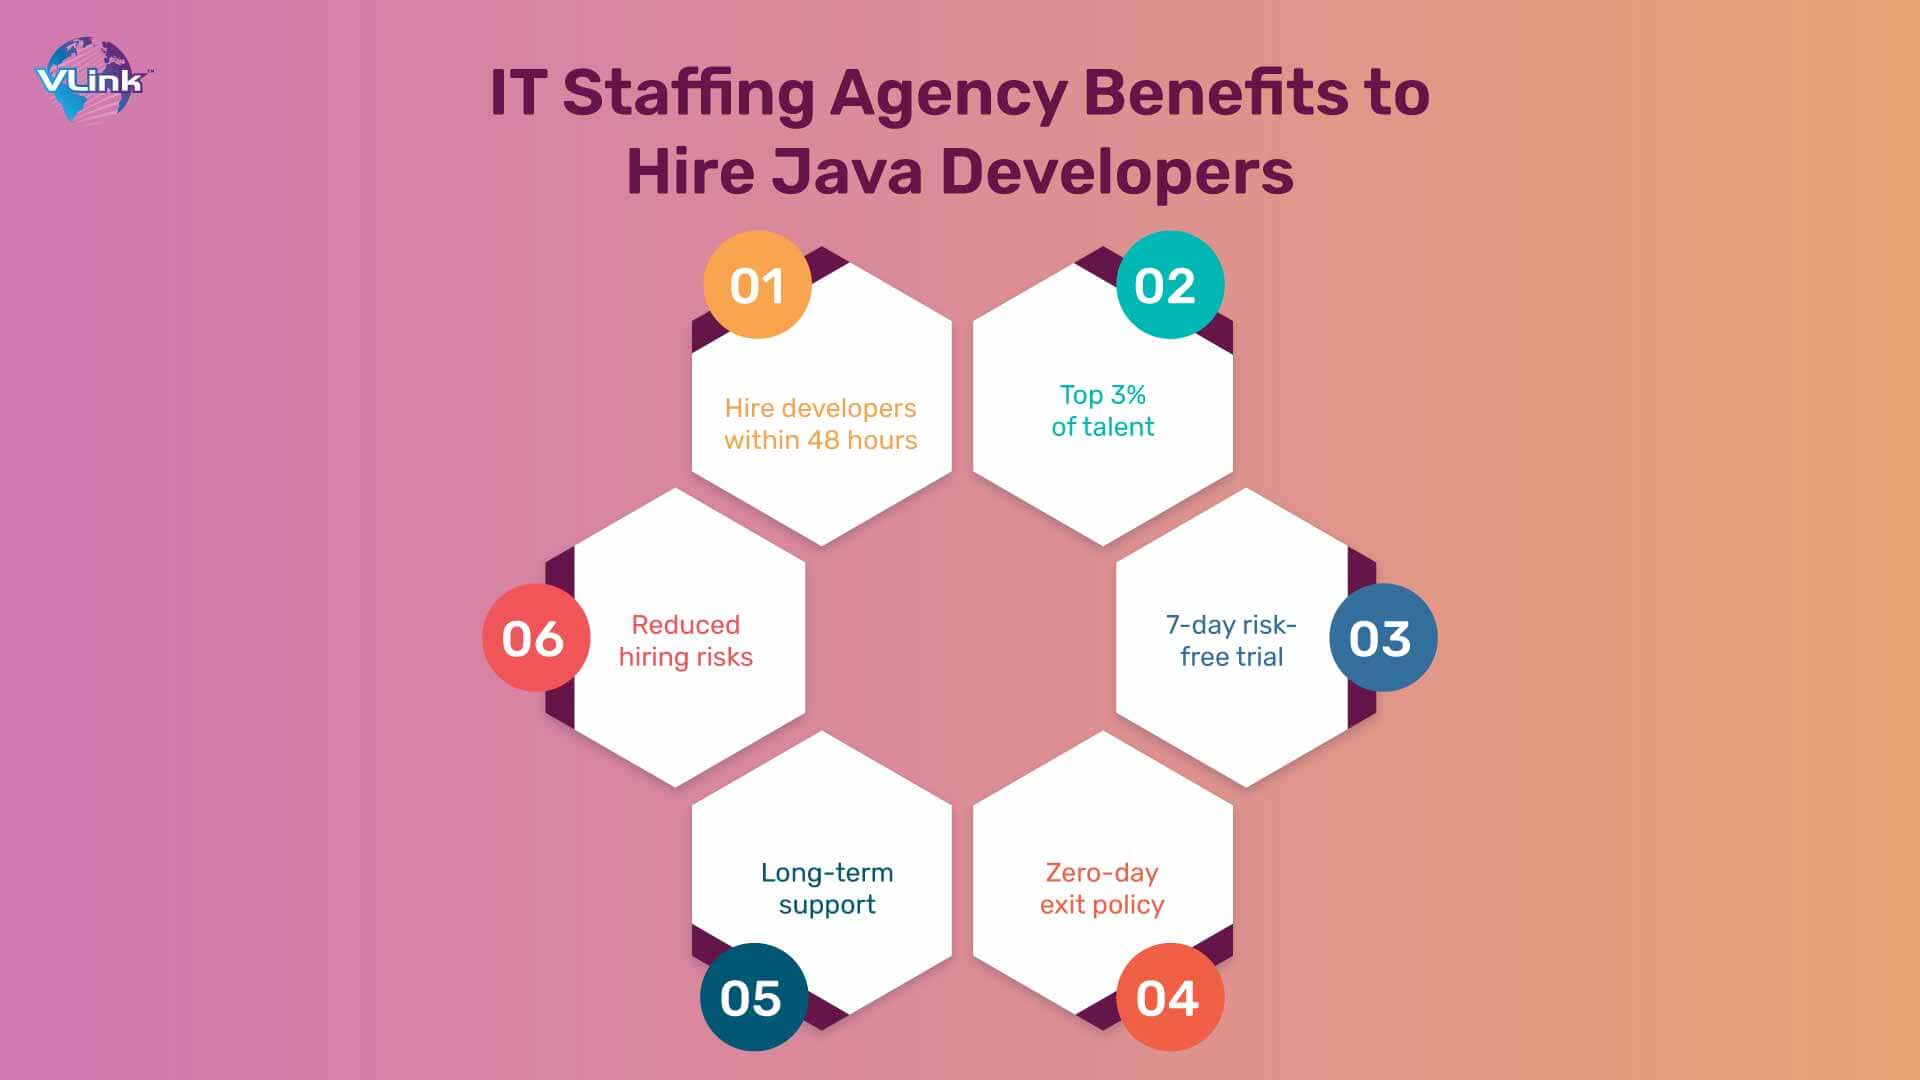 Benefits of choosing an IT staffing agency to hire offshore Java developers